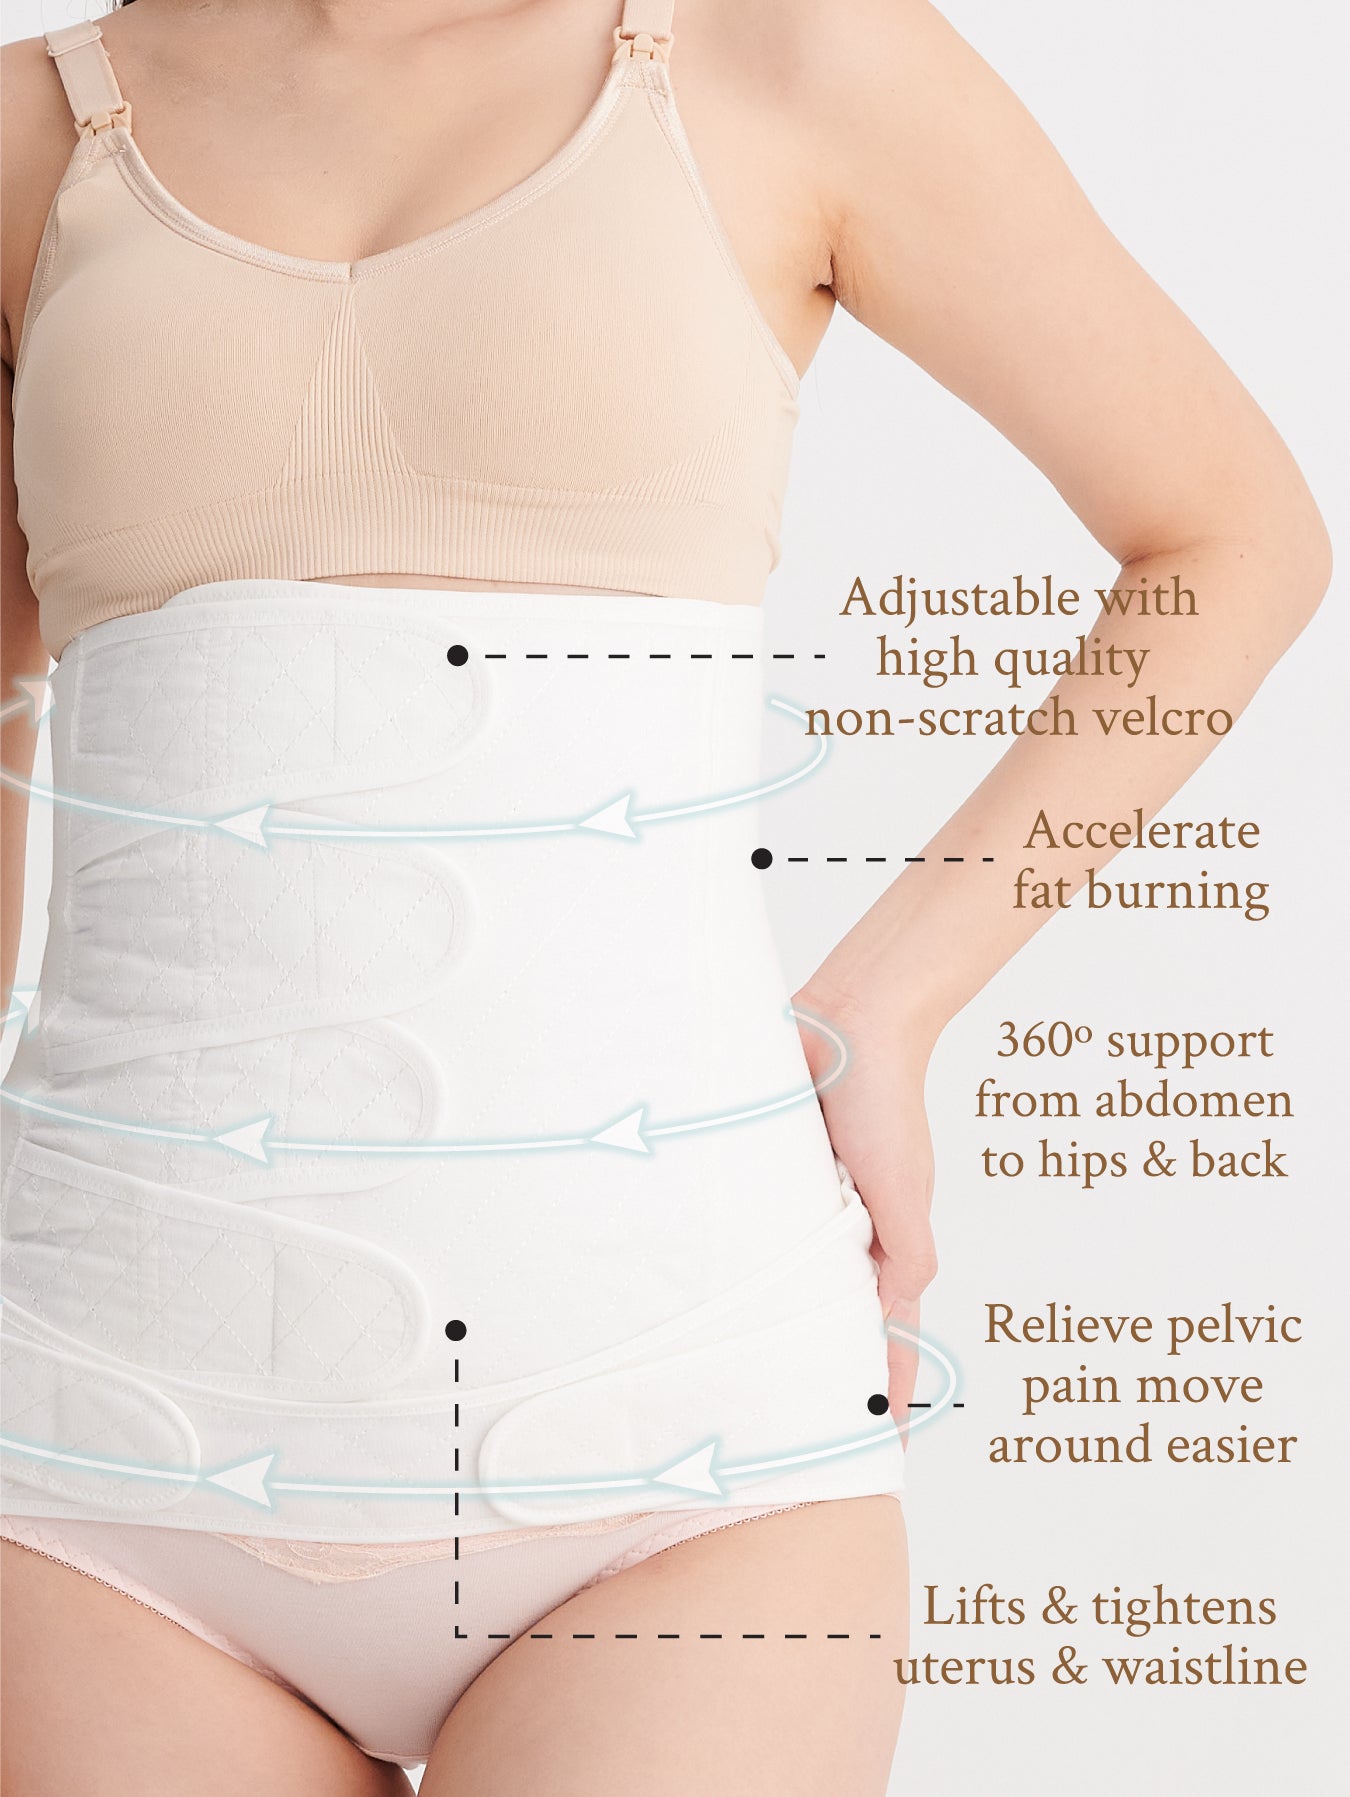 Belly binding for postpartum recovery